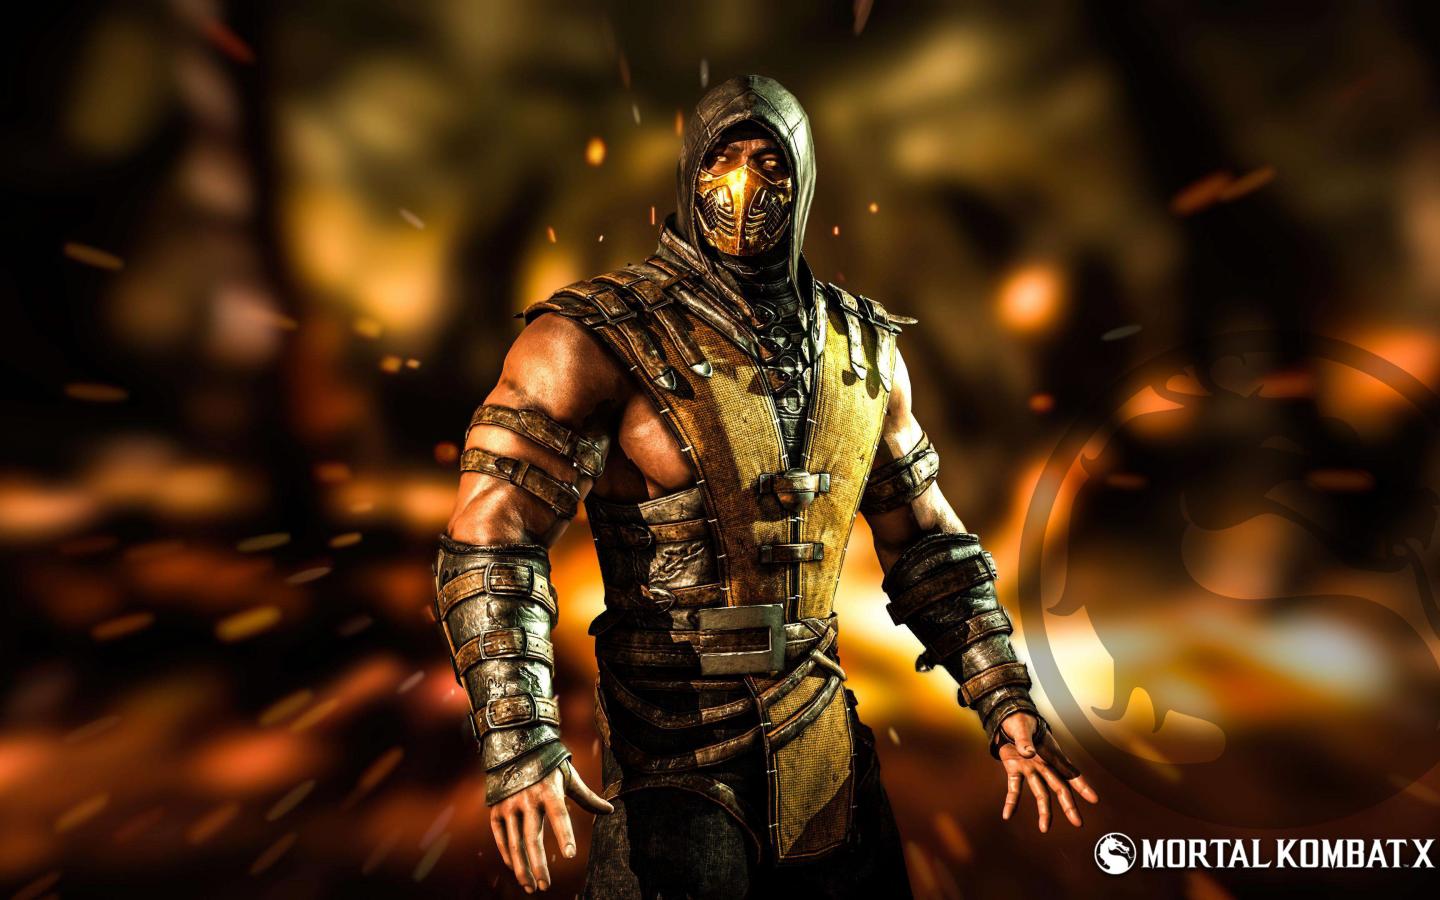 mk name wallpaper,action adventure game,pc game,action figure,fictional character,cg artwork